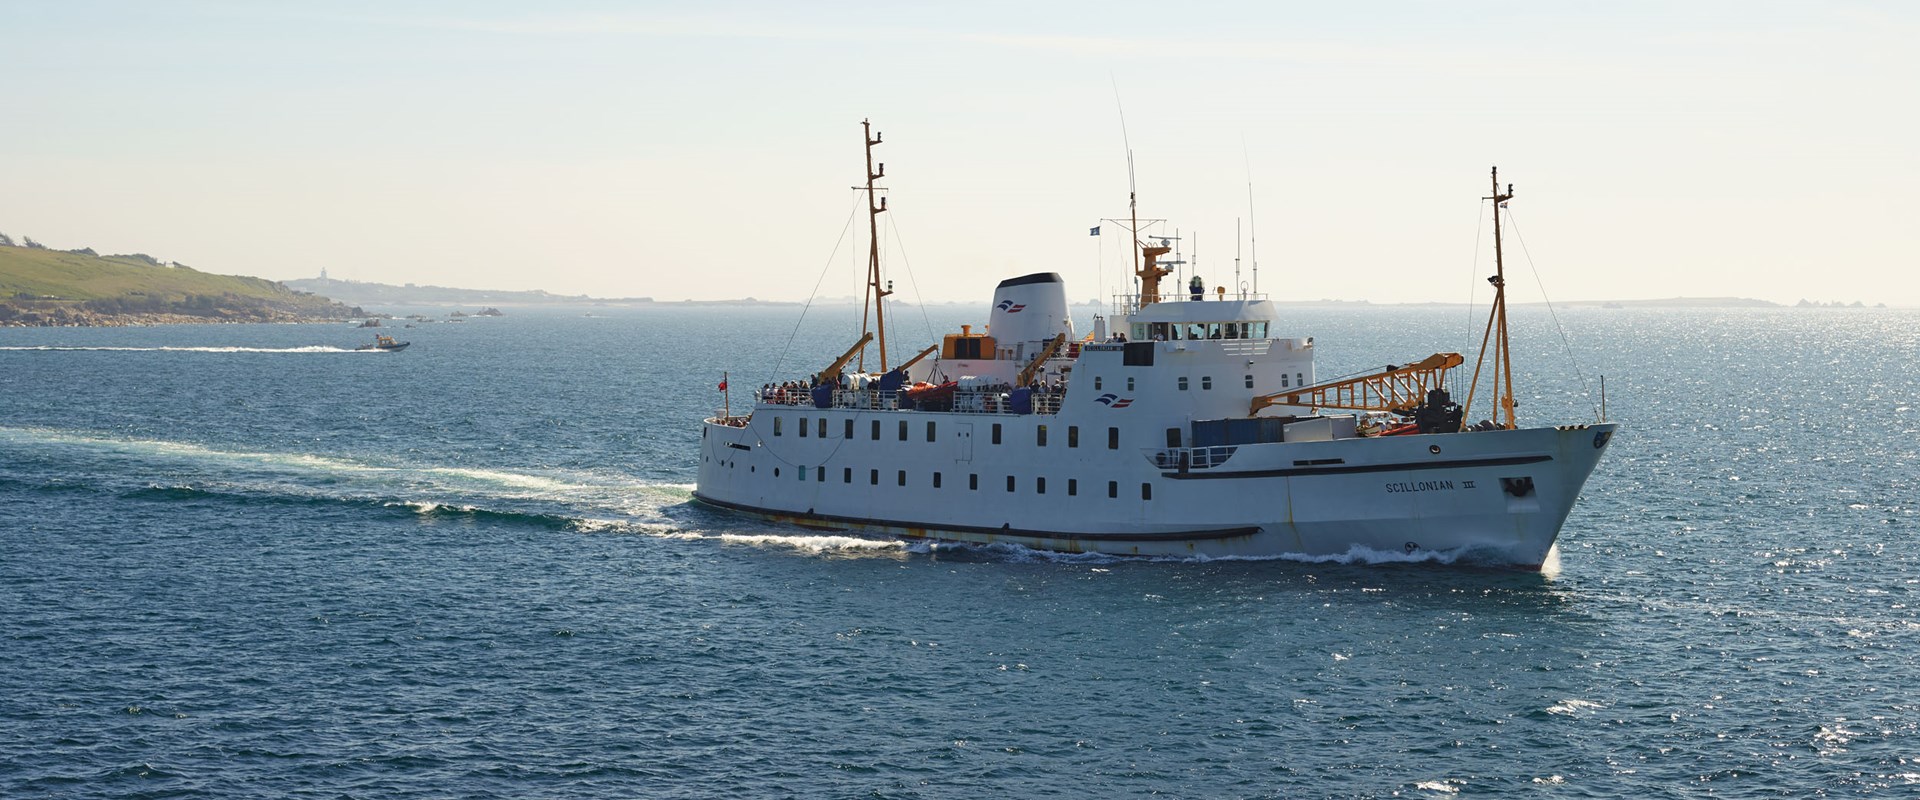 bmt | Isles of Scilly Steamship Group’s Scillonian III passenger ship